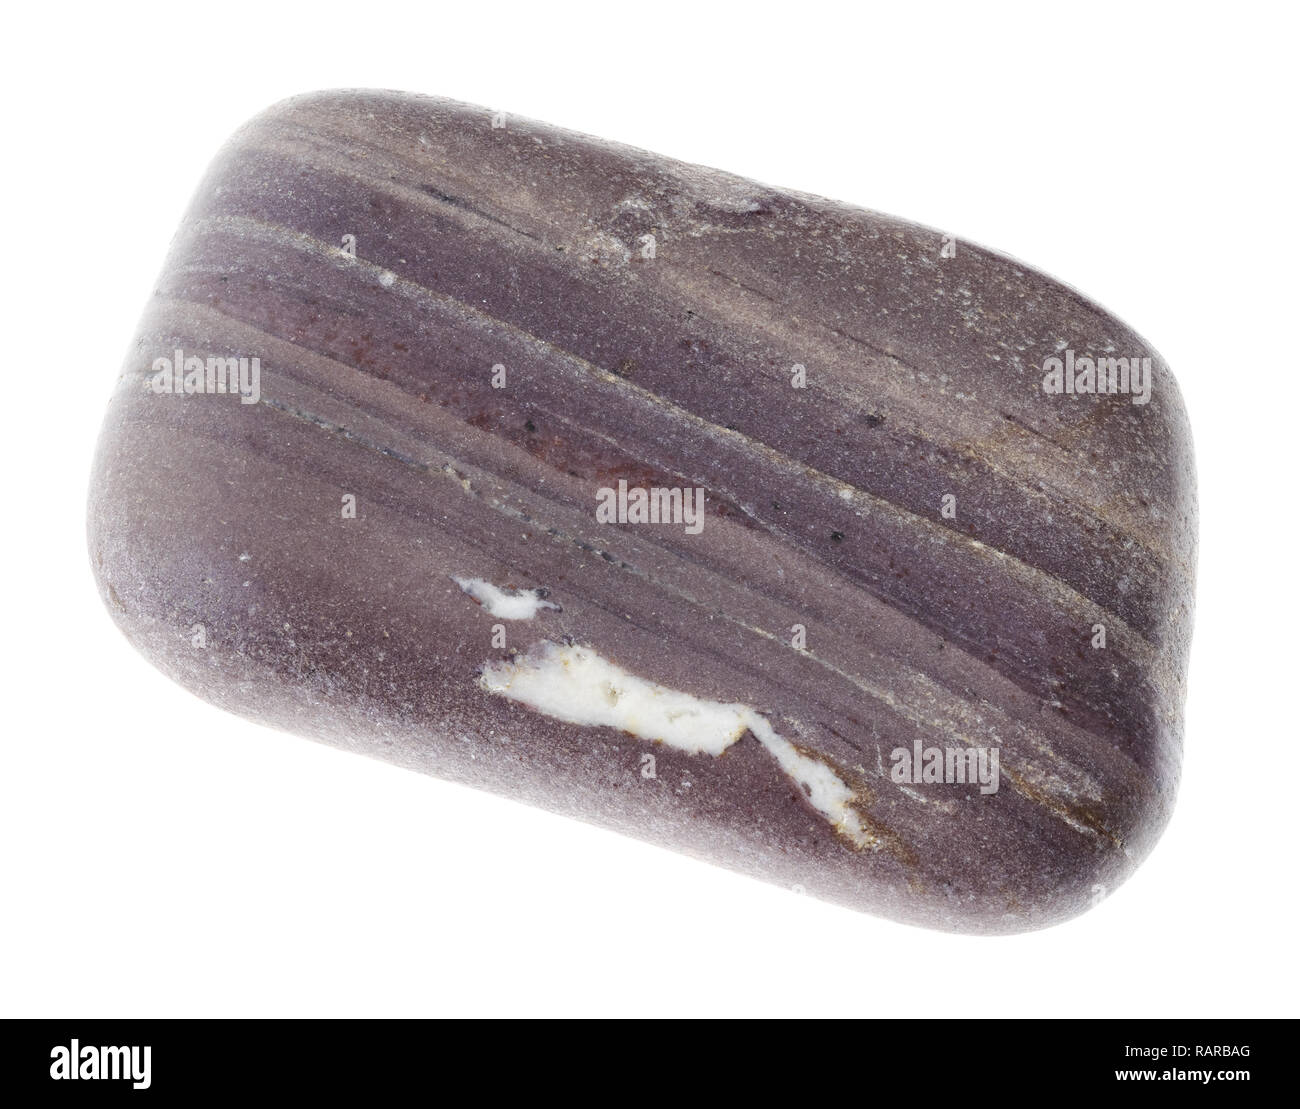 macro photography of natural mineral from geological collection - tumbled argillite (mudstone) stone on white background Stock Photo